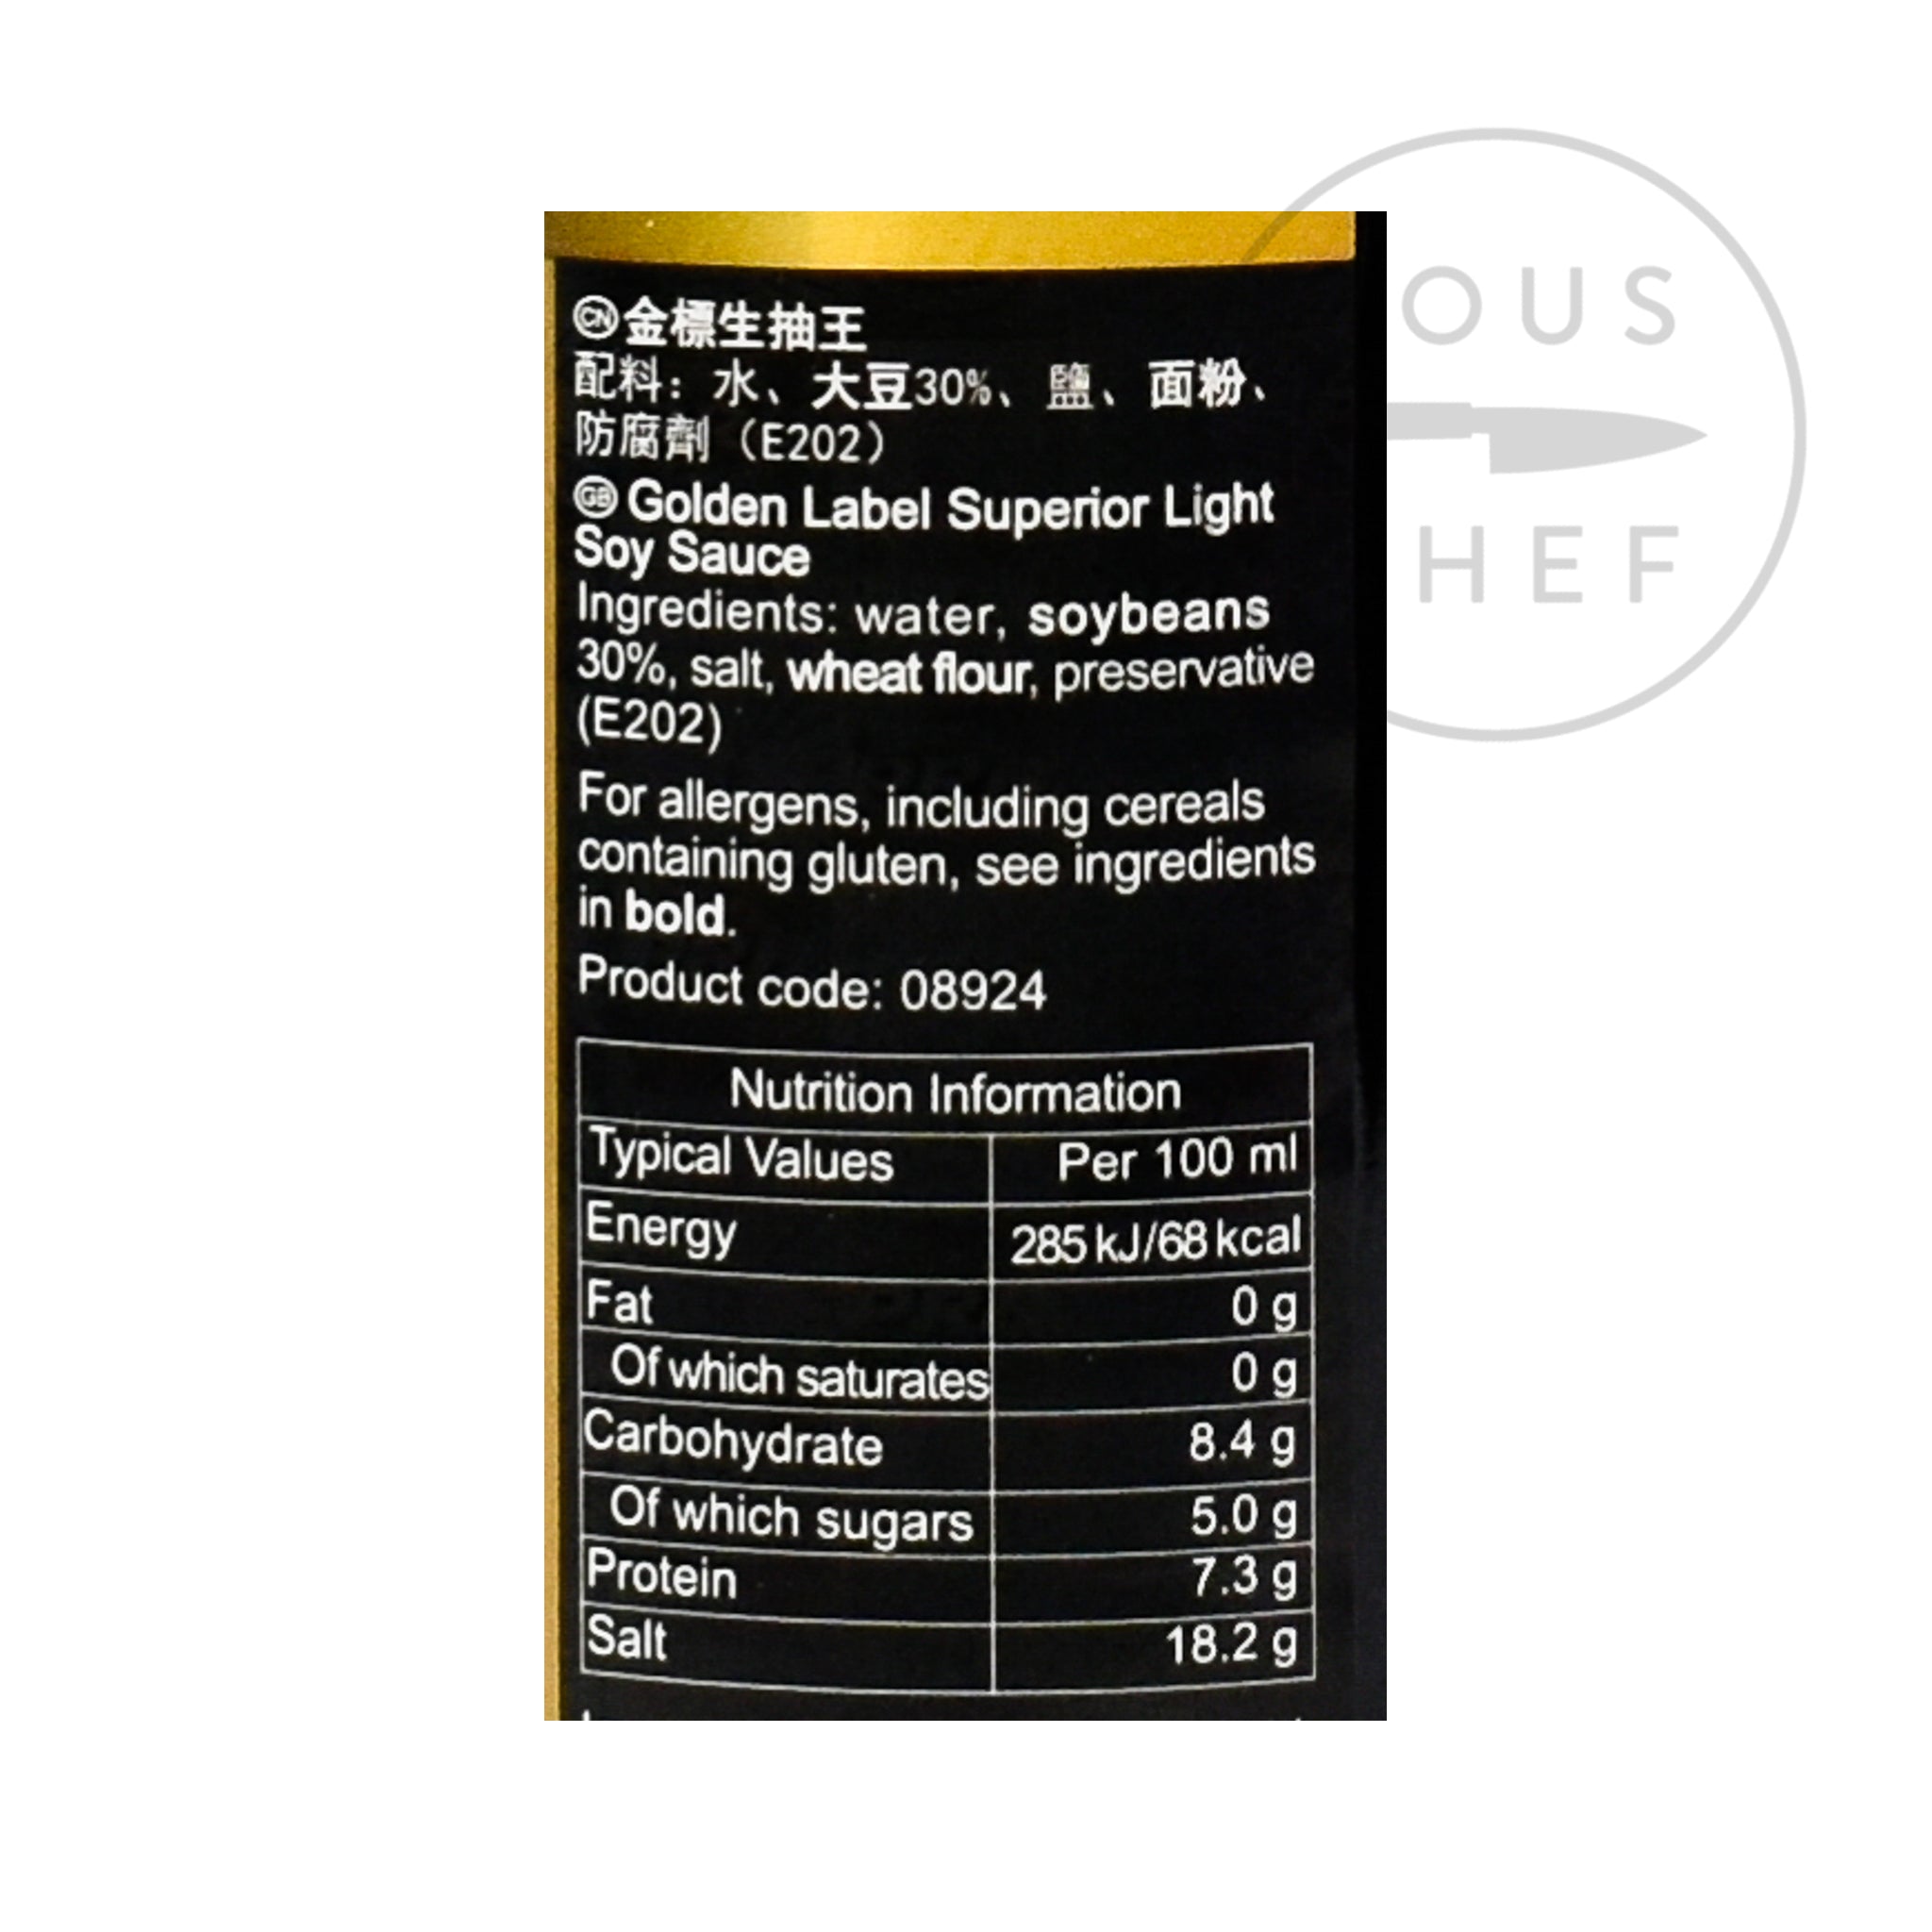 Superior Gold Label Light Soy Sauce, 500ml